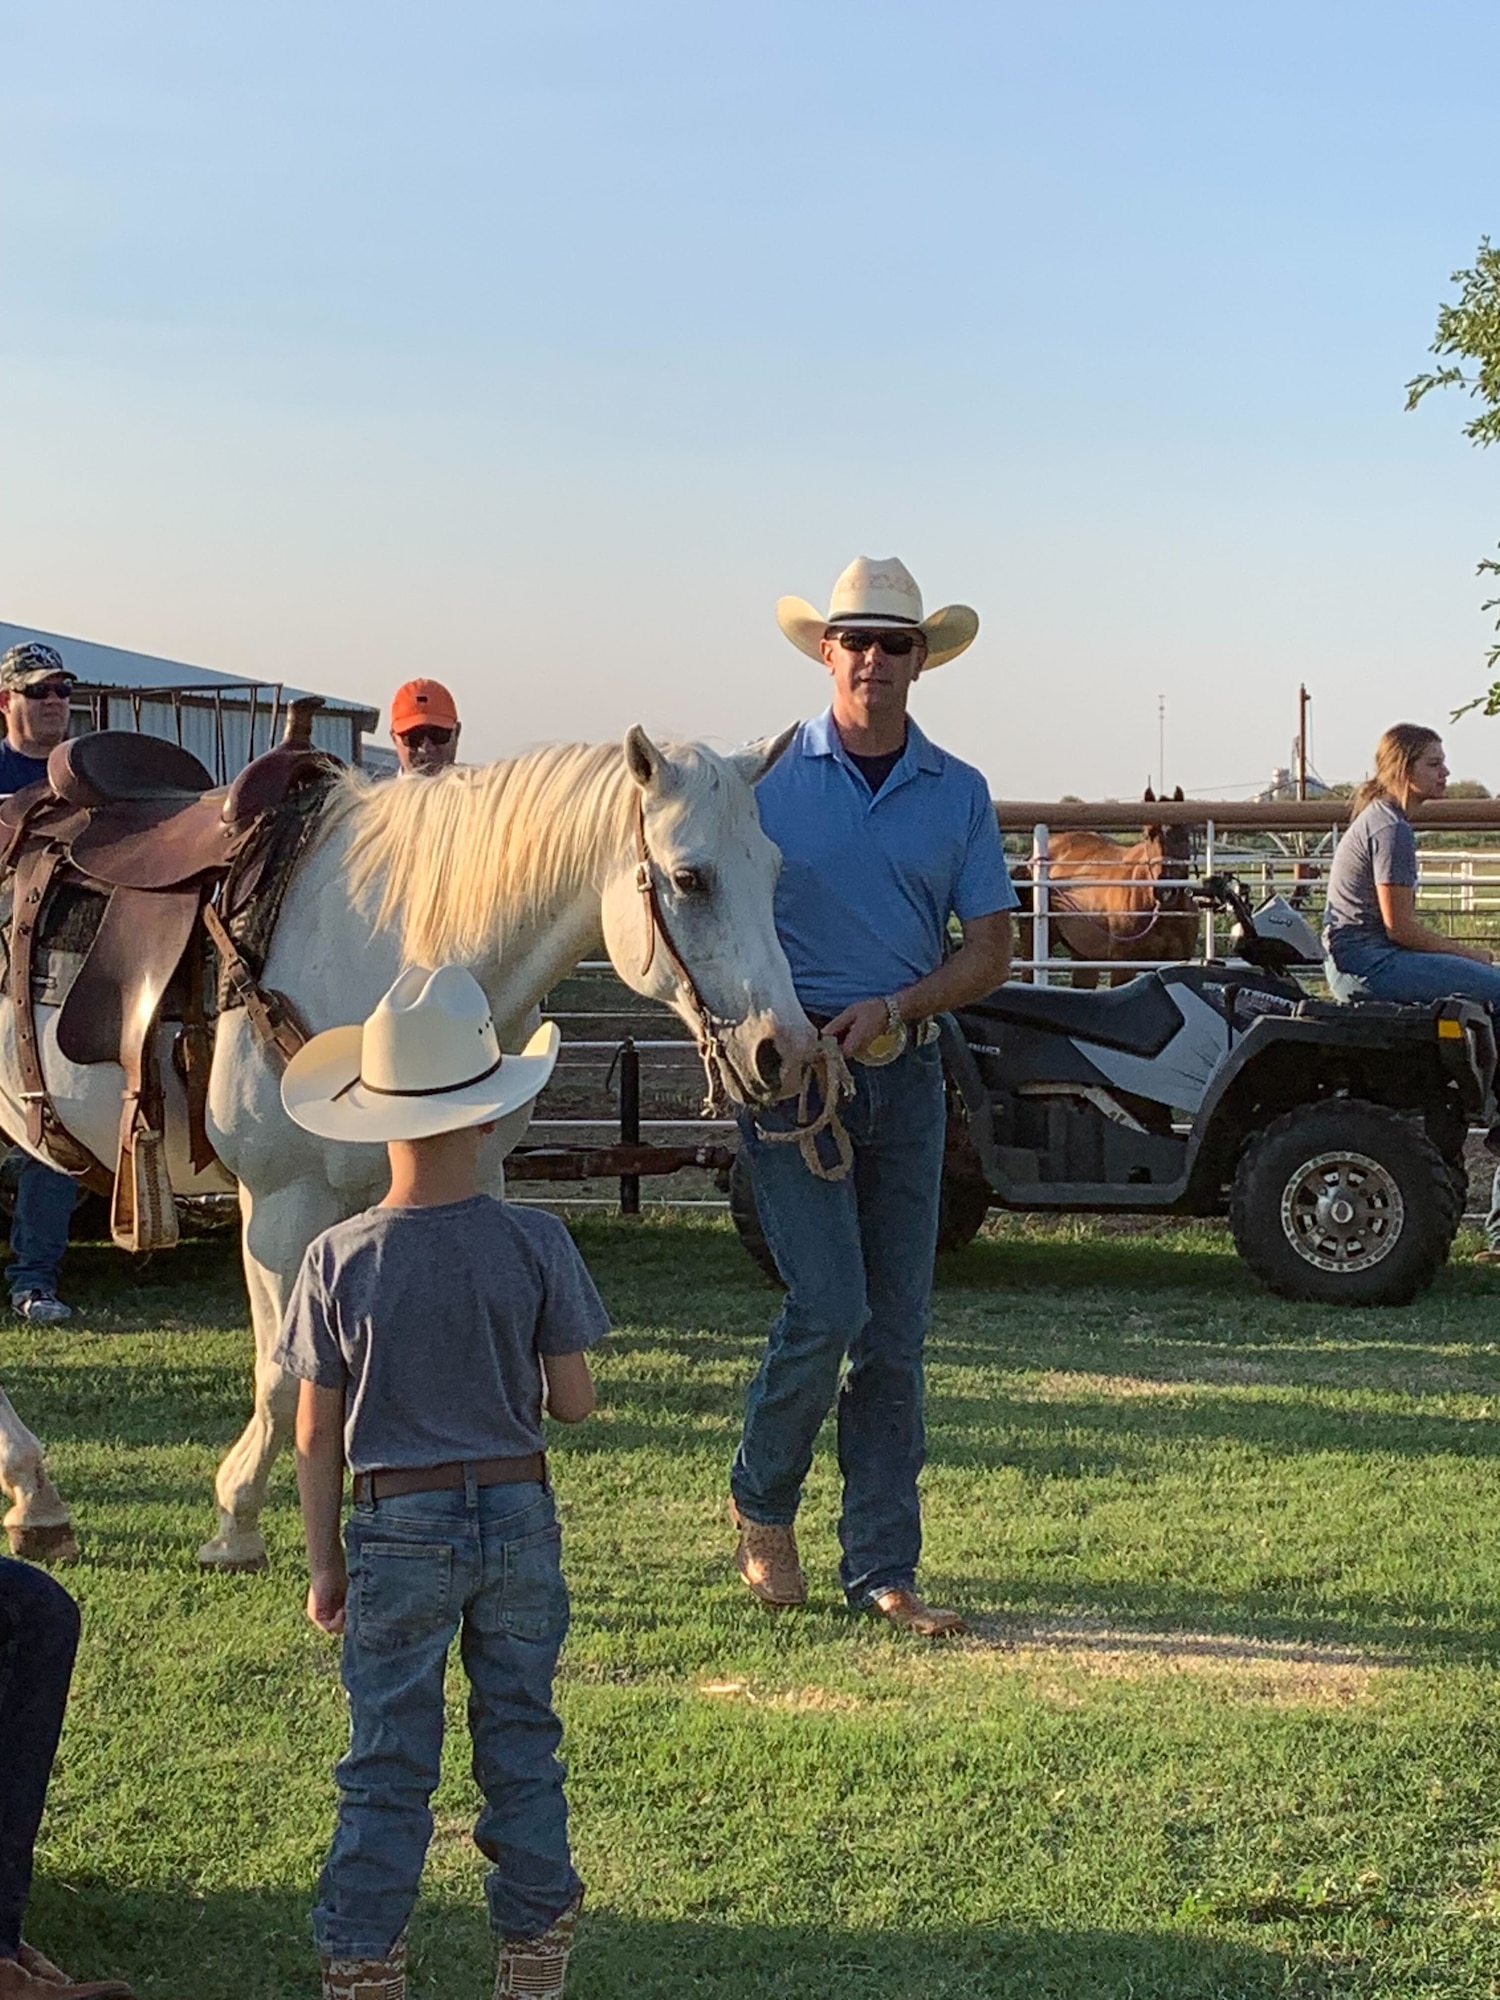 U.S. Air Force Col. Jeffrey Marshall, 97th Air Mobility Wing commander, walks a horse toward a corral during a saddle fitting for the 25th Annual Cattle Drive in Altus, Oklahoma, Aug. 19, 2023. The cattle drive is conducted in the spirit of the ‘Great Western Cattle Trail,’ which started near Kerrville, Texas, and went north all the way to Canada. (U.S. Air Force photo by Airman 1st Class Kari Degraffenreed)